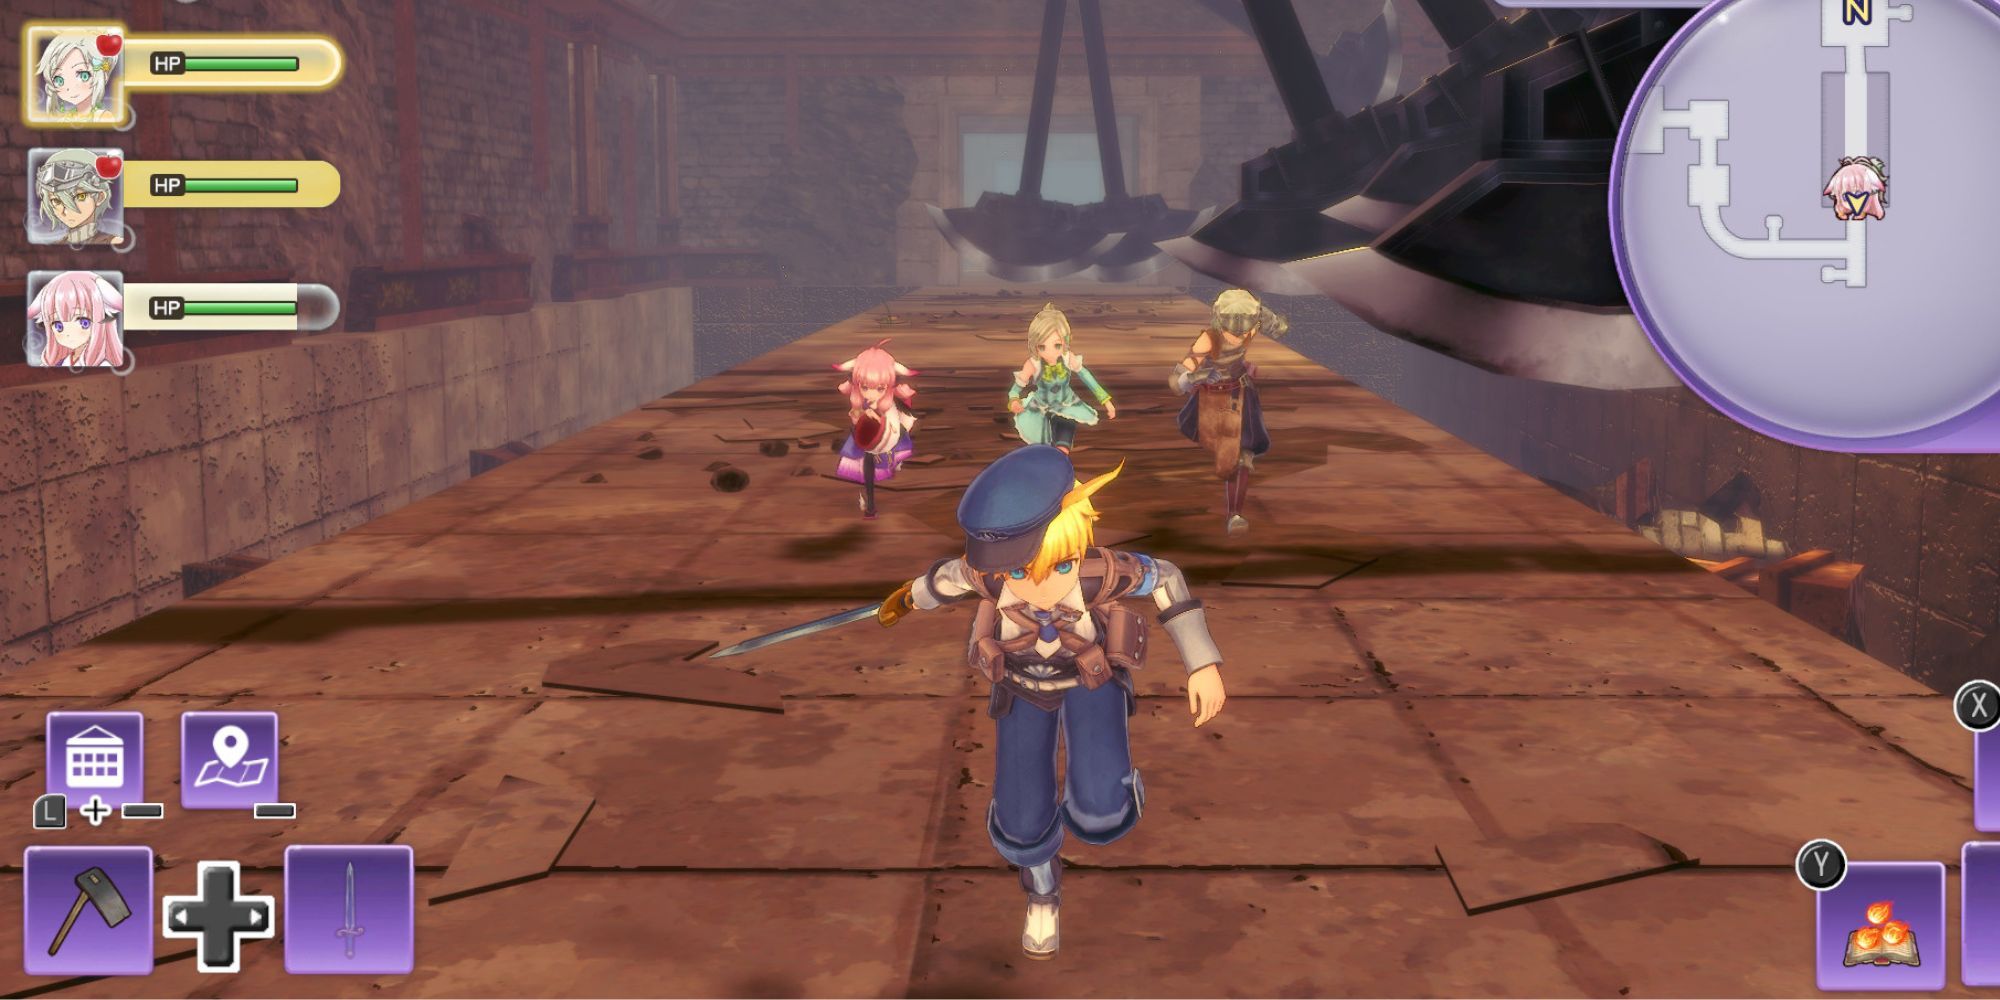 The player running through a dungeon being followed by three companions in Rune Factory 5